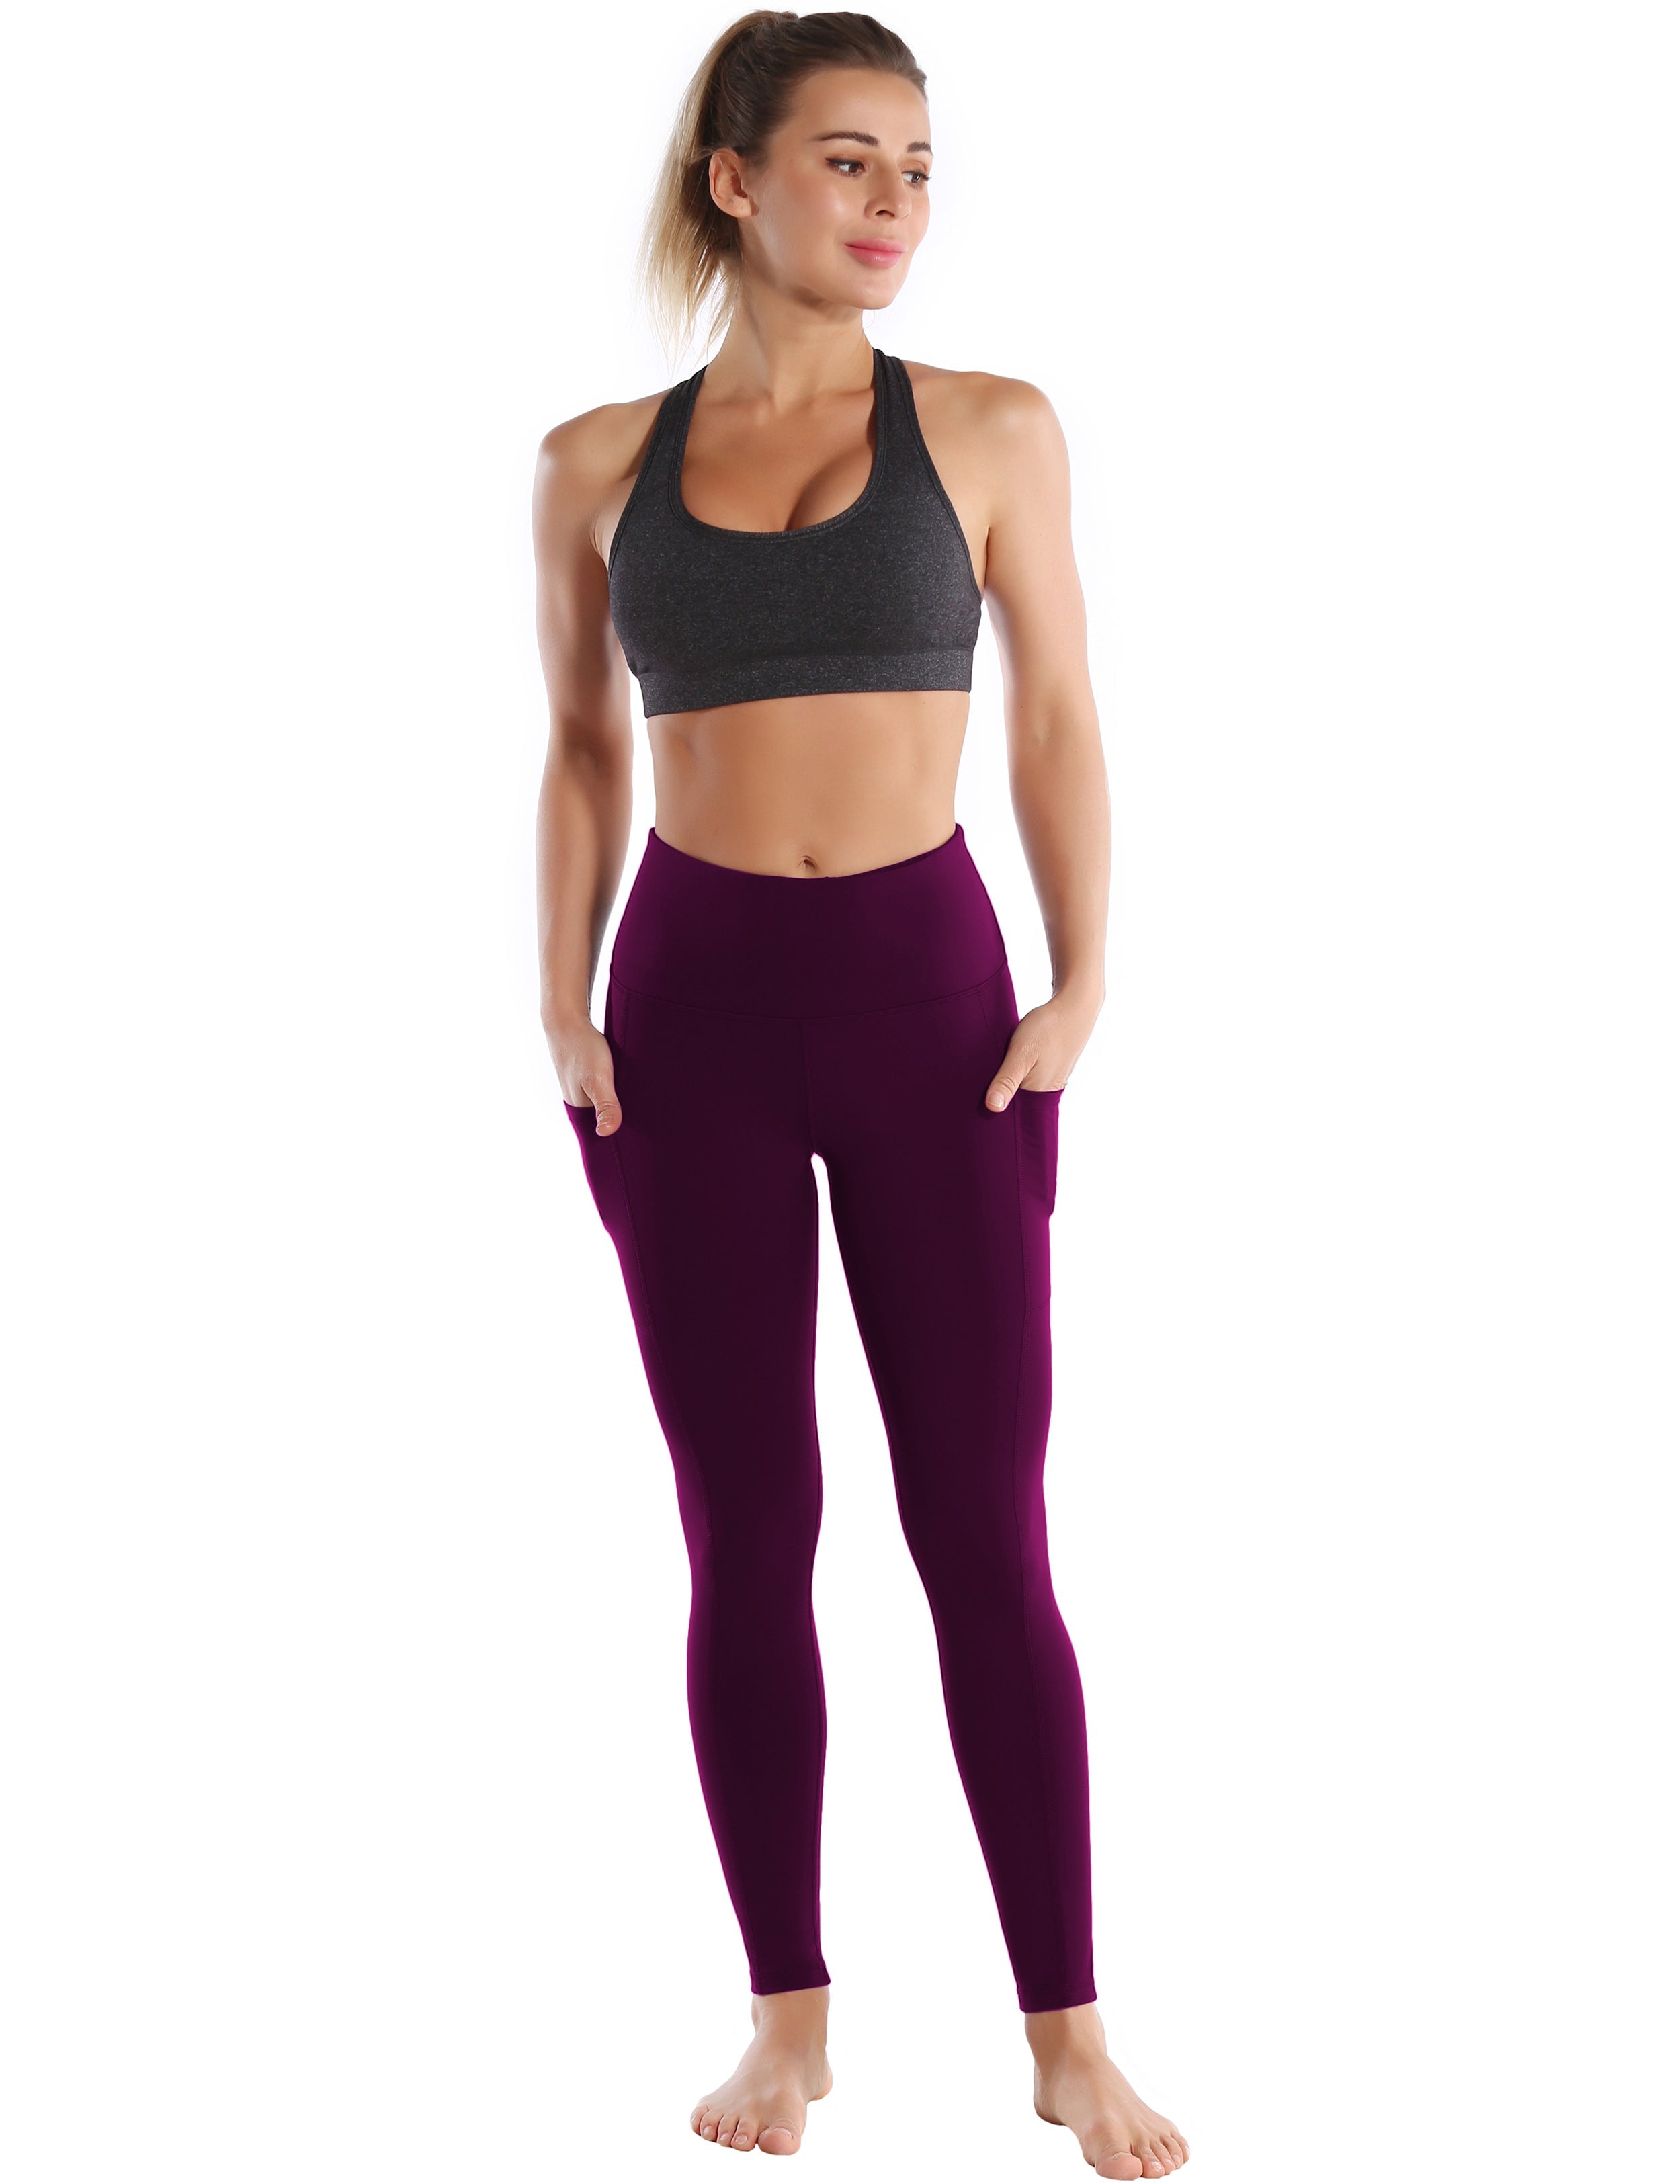 Hip Line Side Pockets Yoga Pants plum Sexy Hip Line Side Pockets 75%Nylon/25%Spandex Fabric doesn't attract lint easily 4-way stretch No see-through Moisture-wicking Tummy control Inner pocket Two lengths